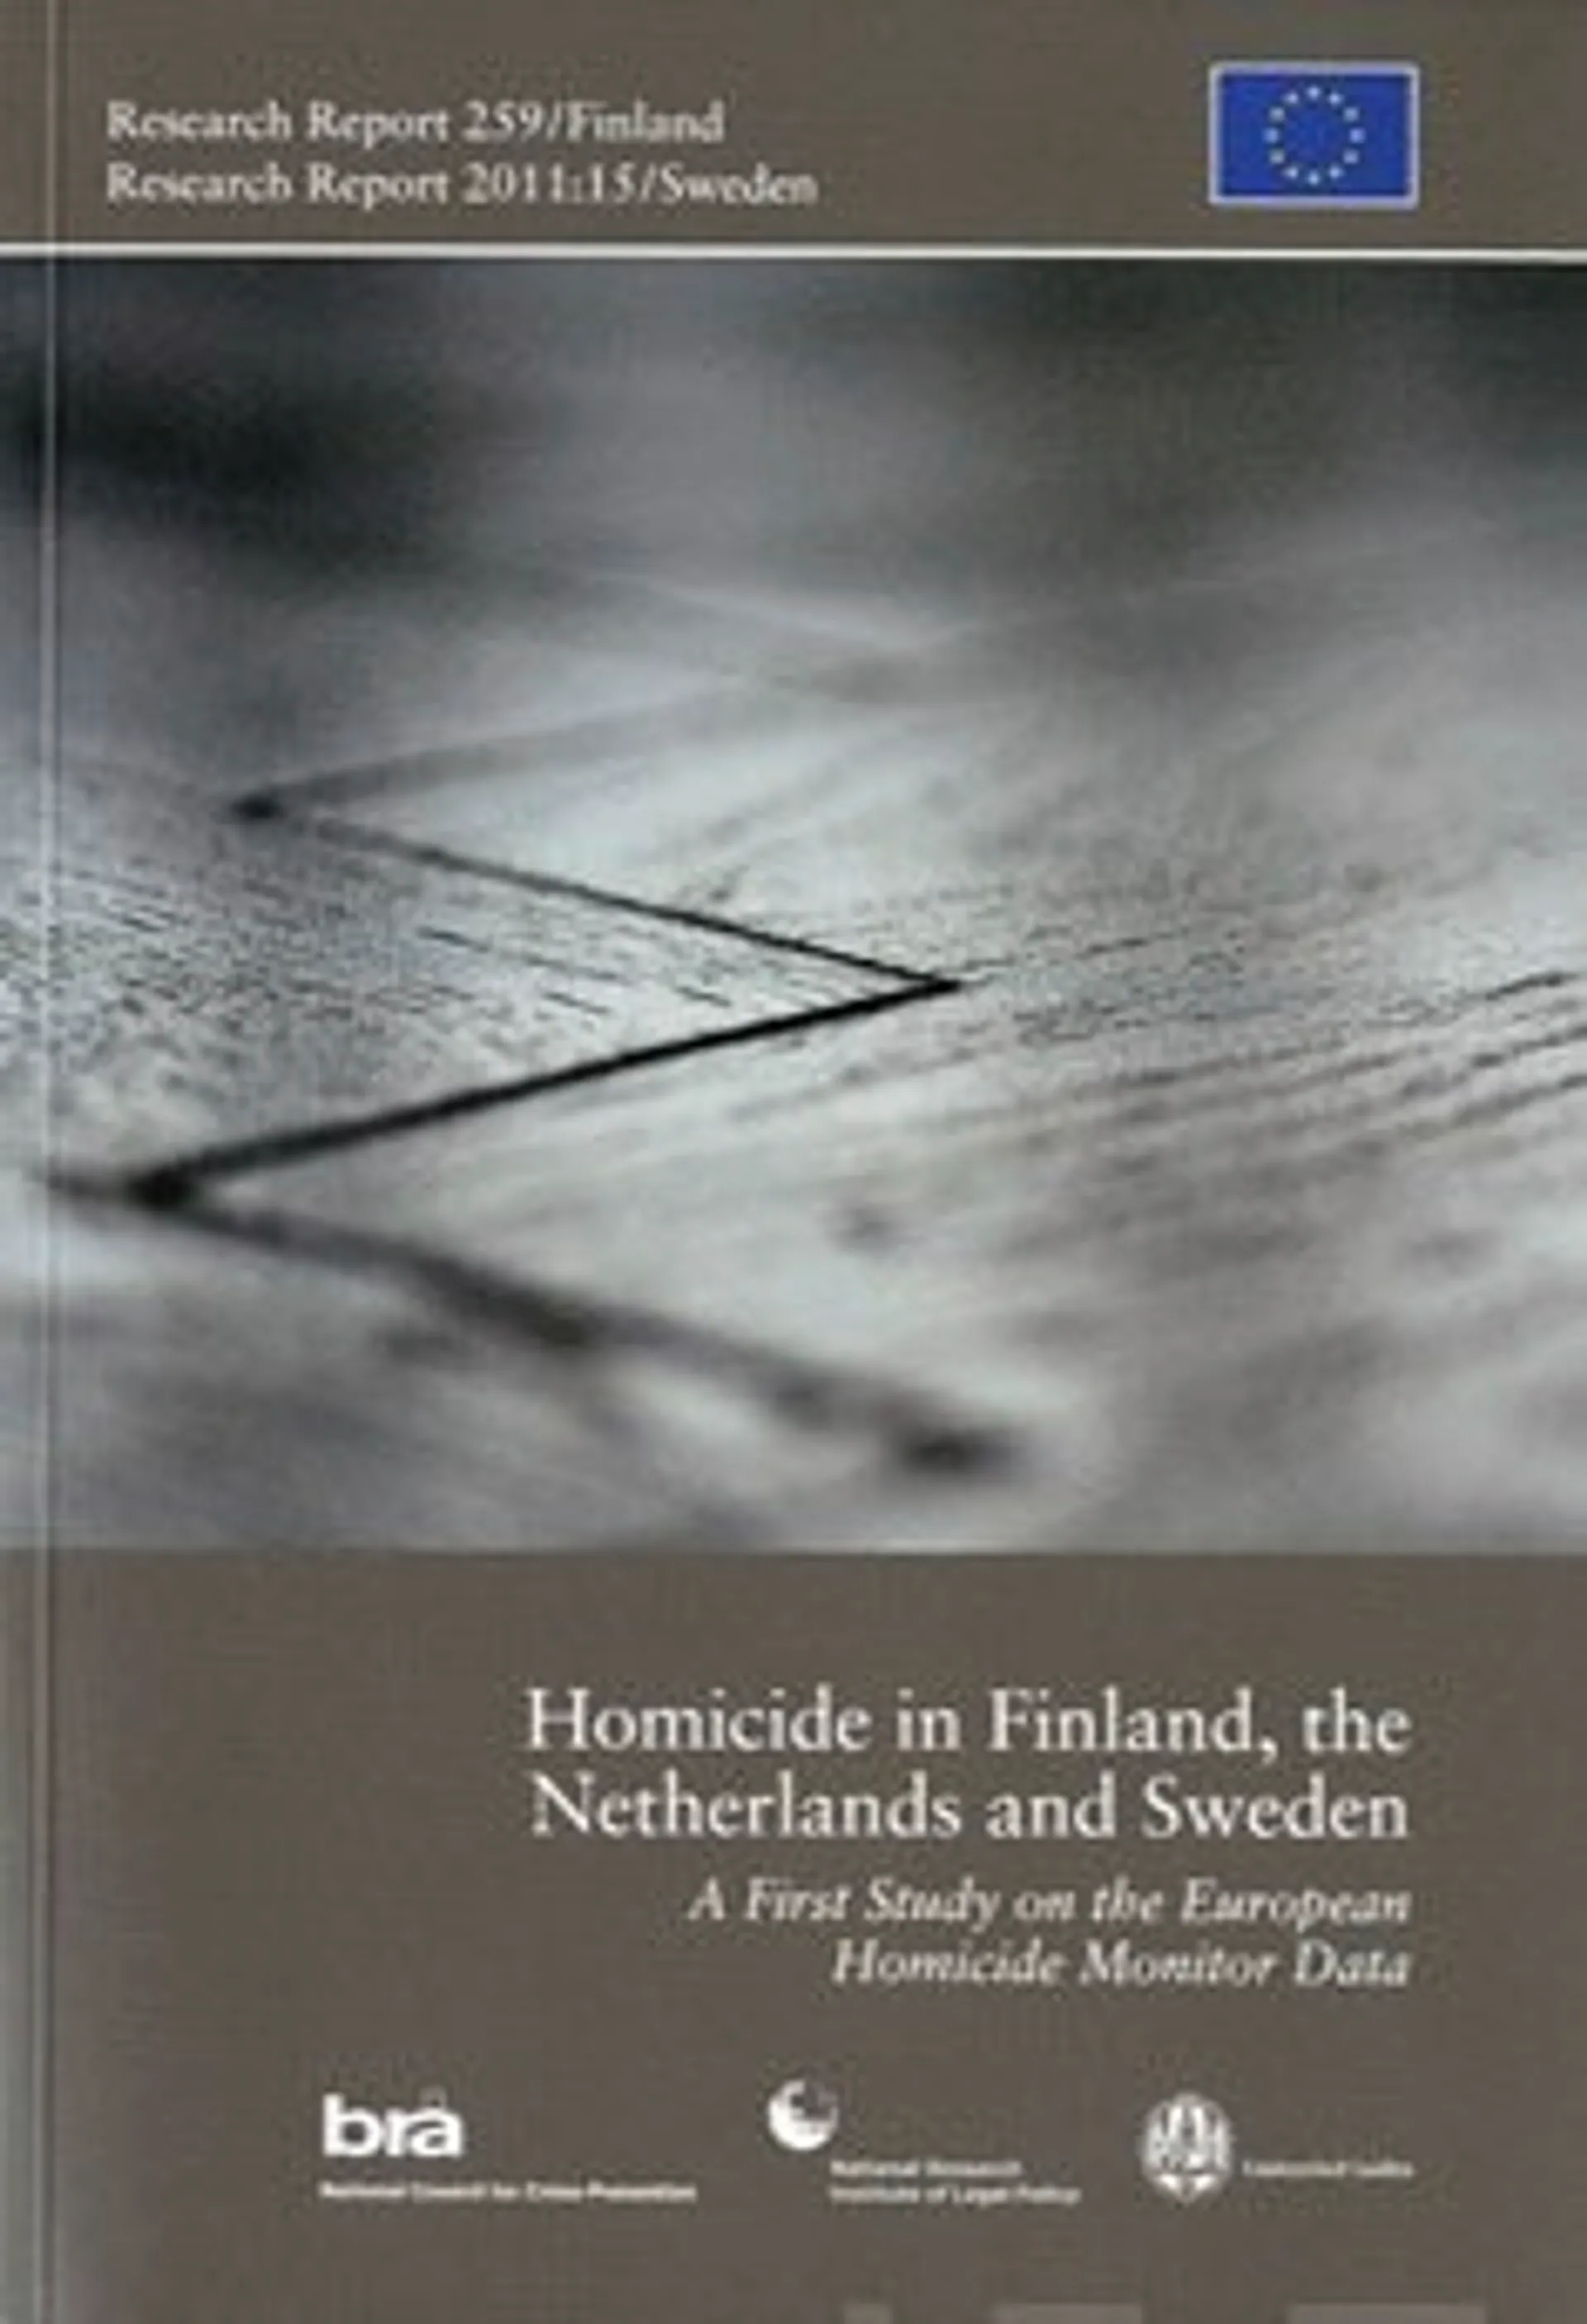 Homicide in Finland, the Netherlands and Sweden